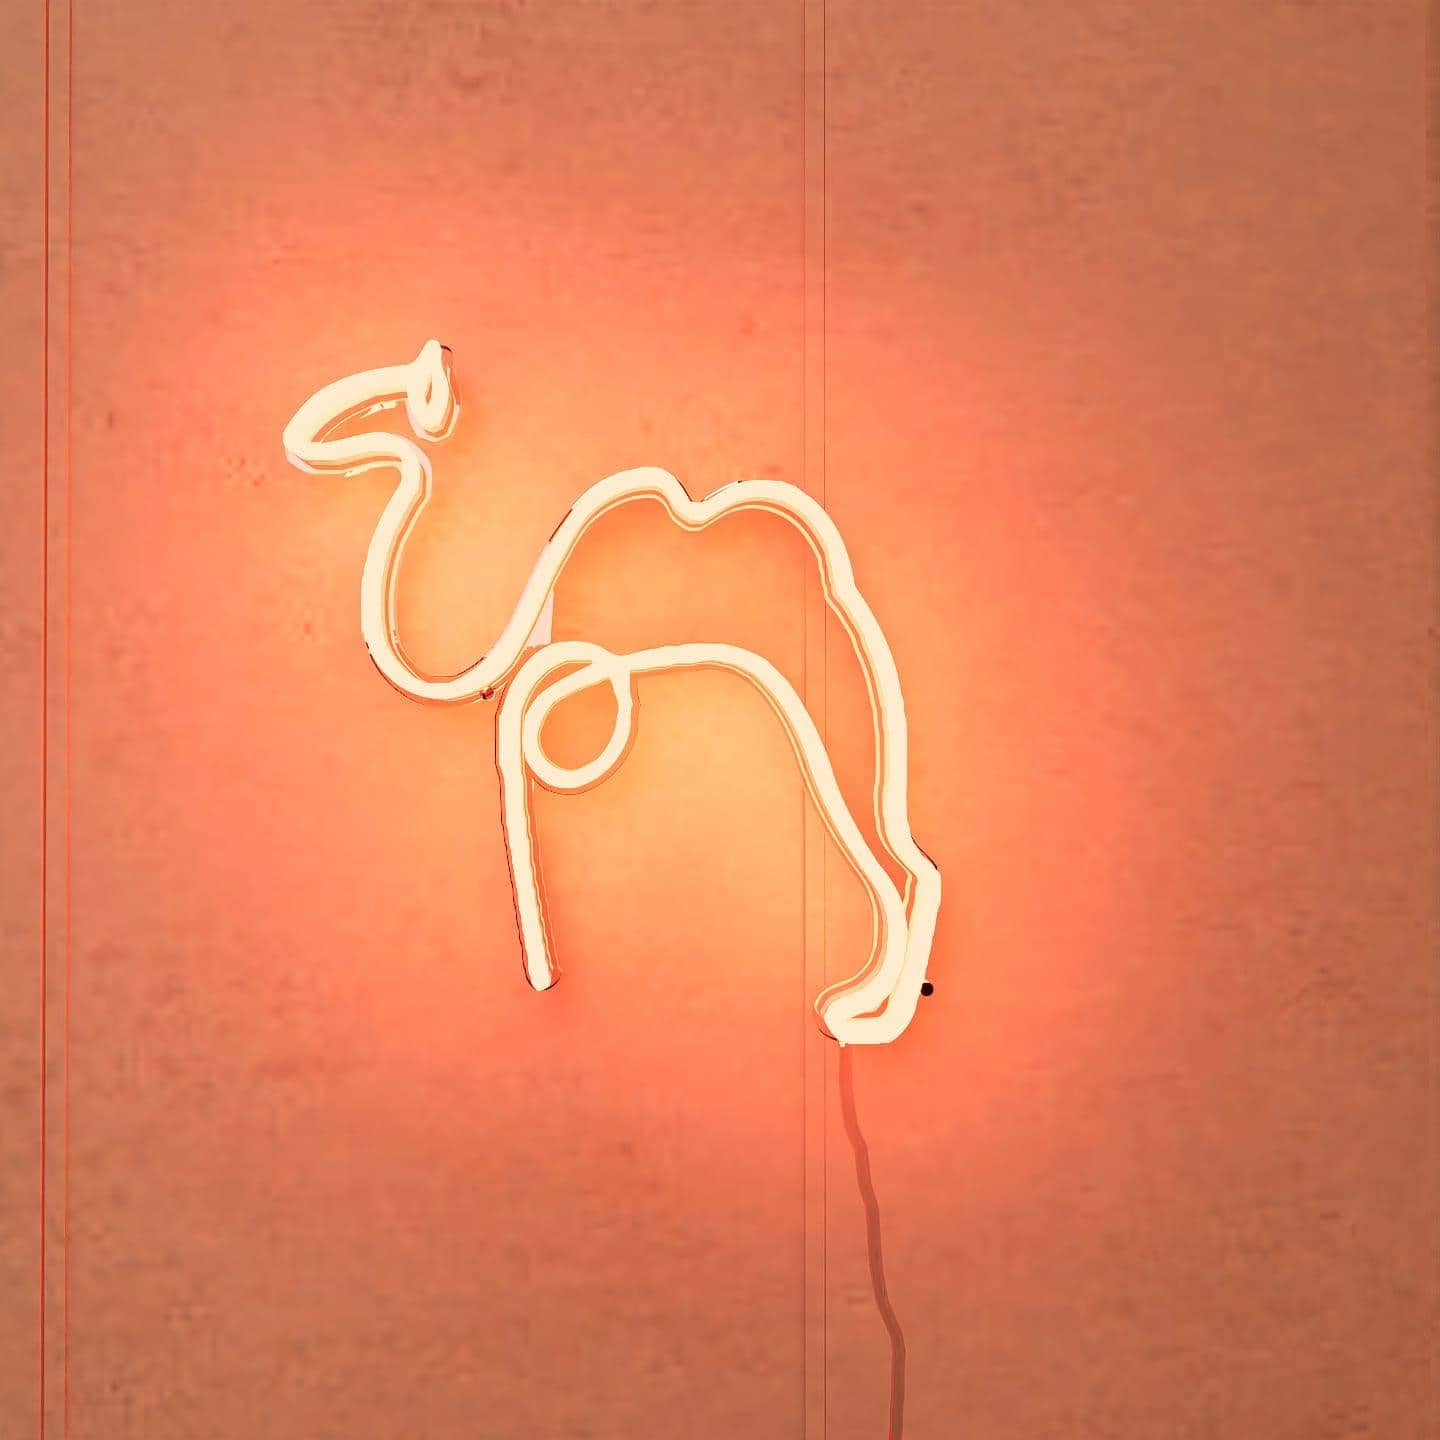 A neon sketch of a camel basking in a sunset-like orange glow.